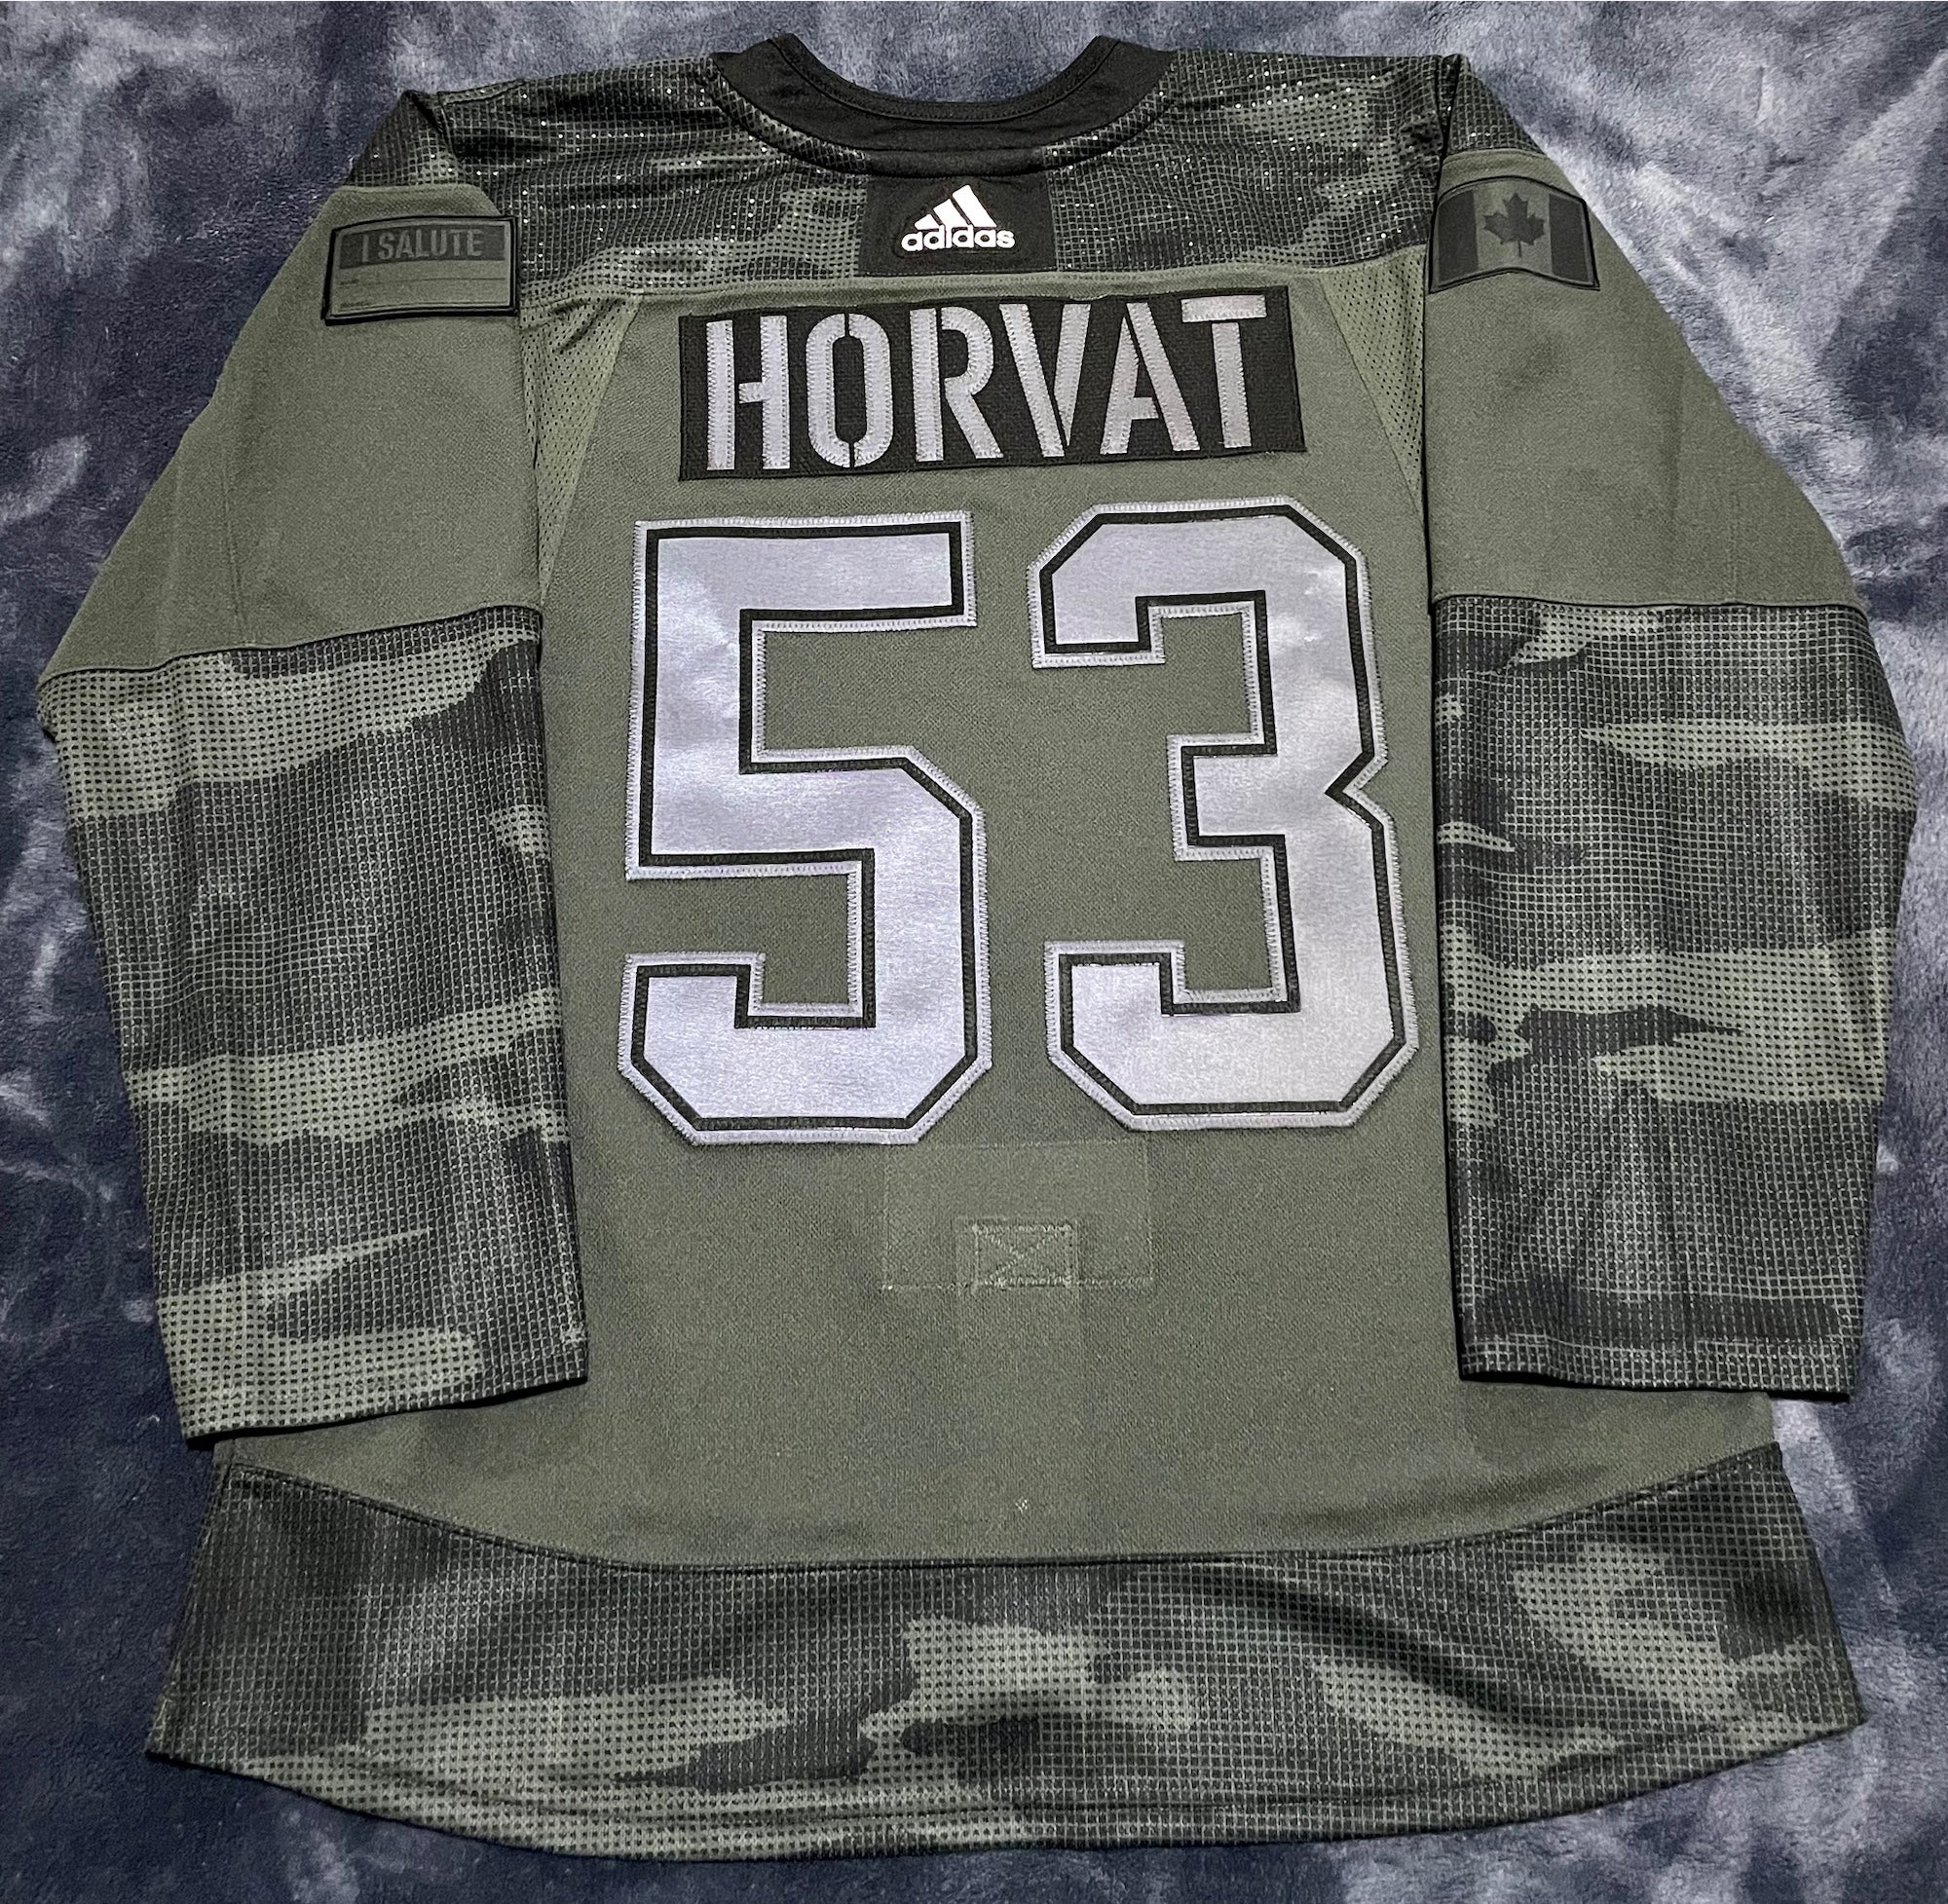 Bo Horvat Vancouver Canucks adidas Alternate Authentic Pro Player